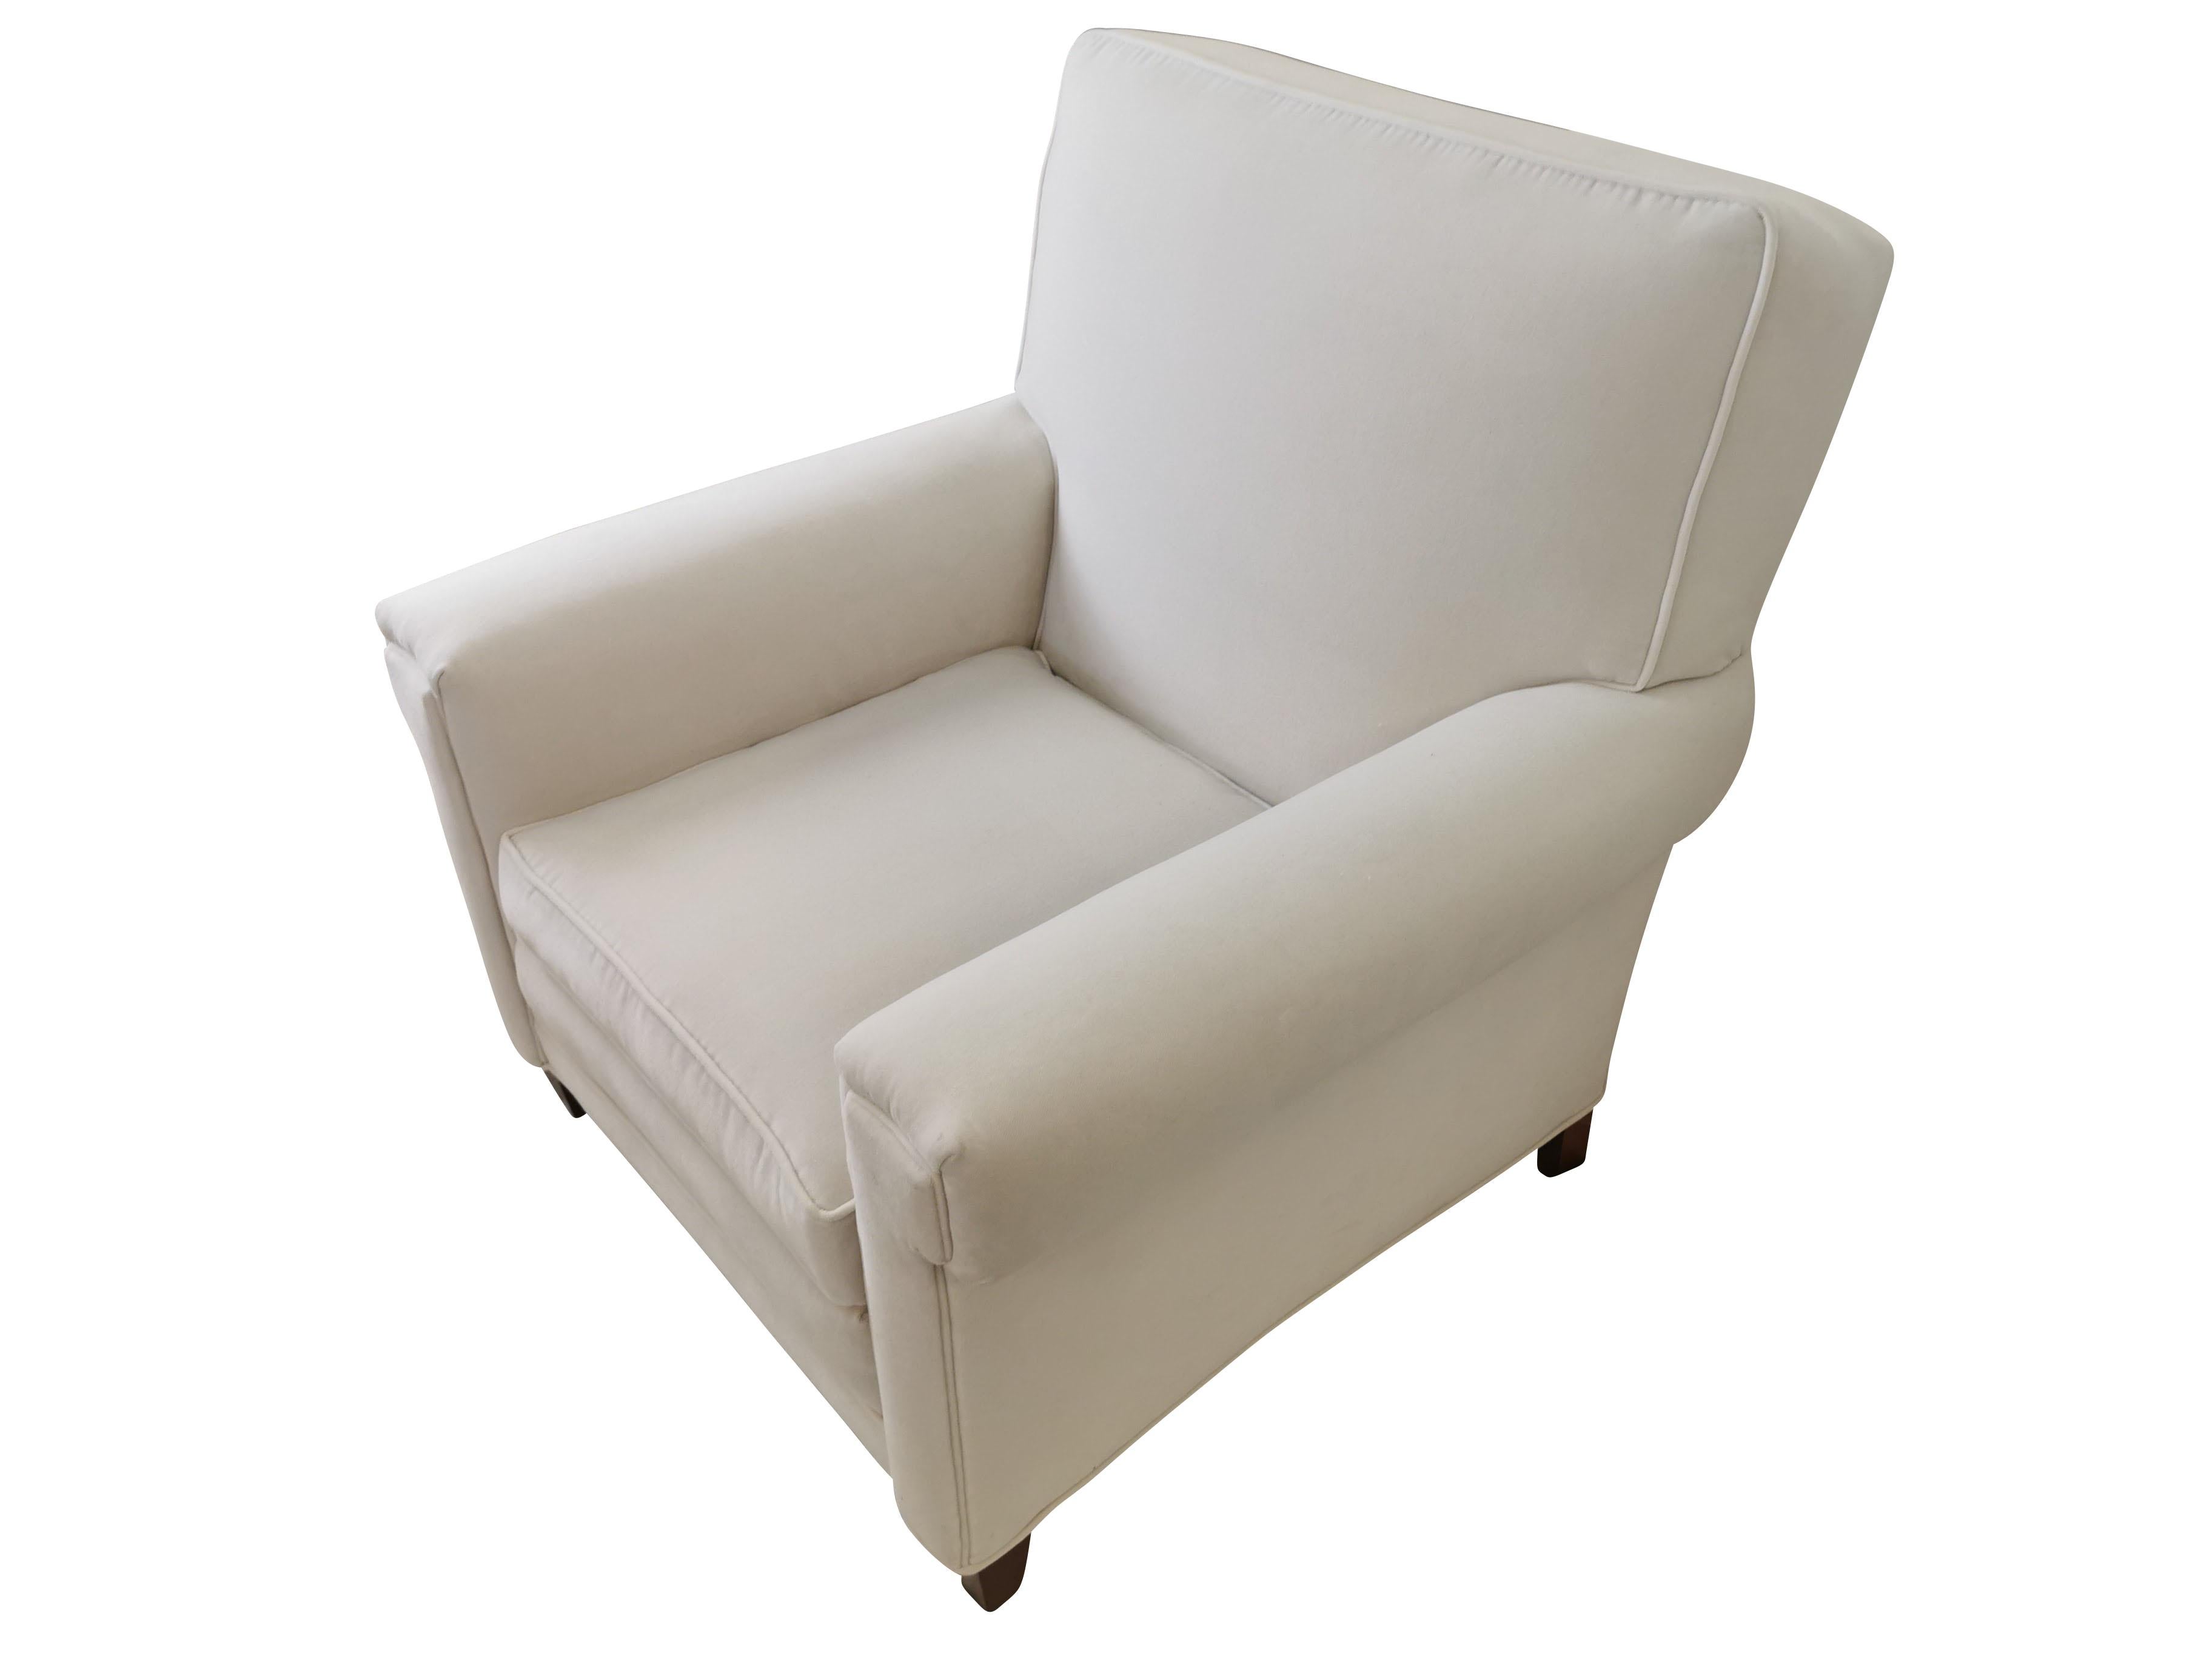 Custom made in the 1940's, these oversized white velvet club chairs were meticulous restored in our Connecticut workroom. They have coil springs in both the seat back and seat cushion. In keeping with the art deco look, we kept the 